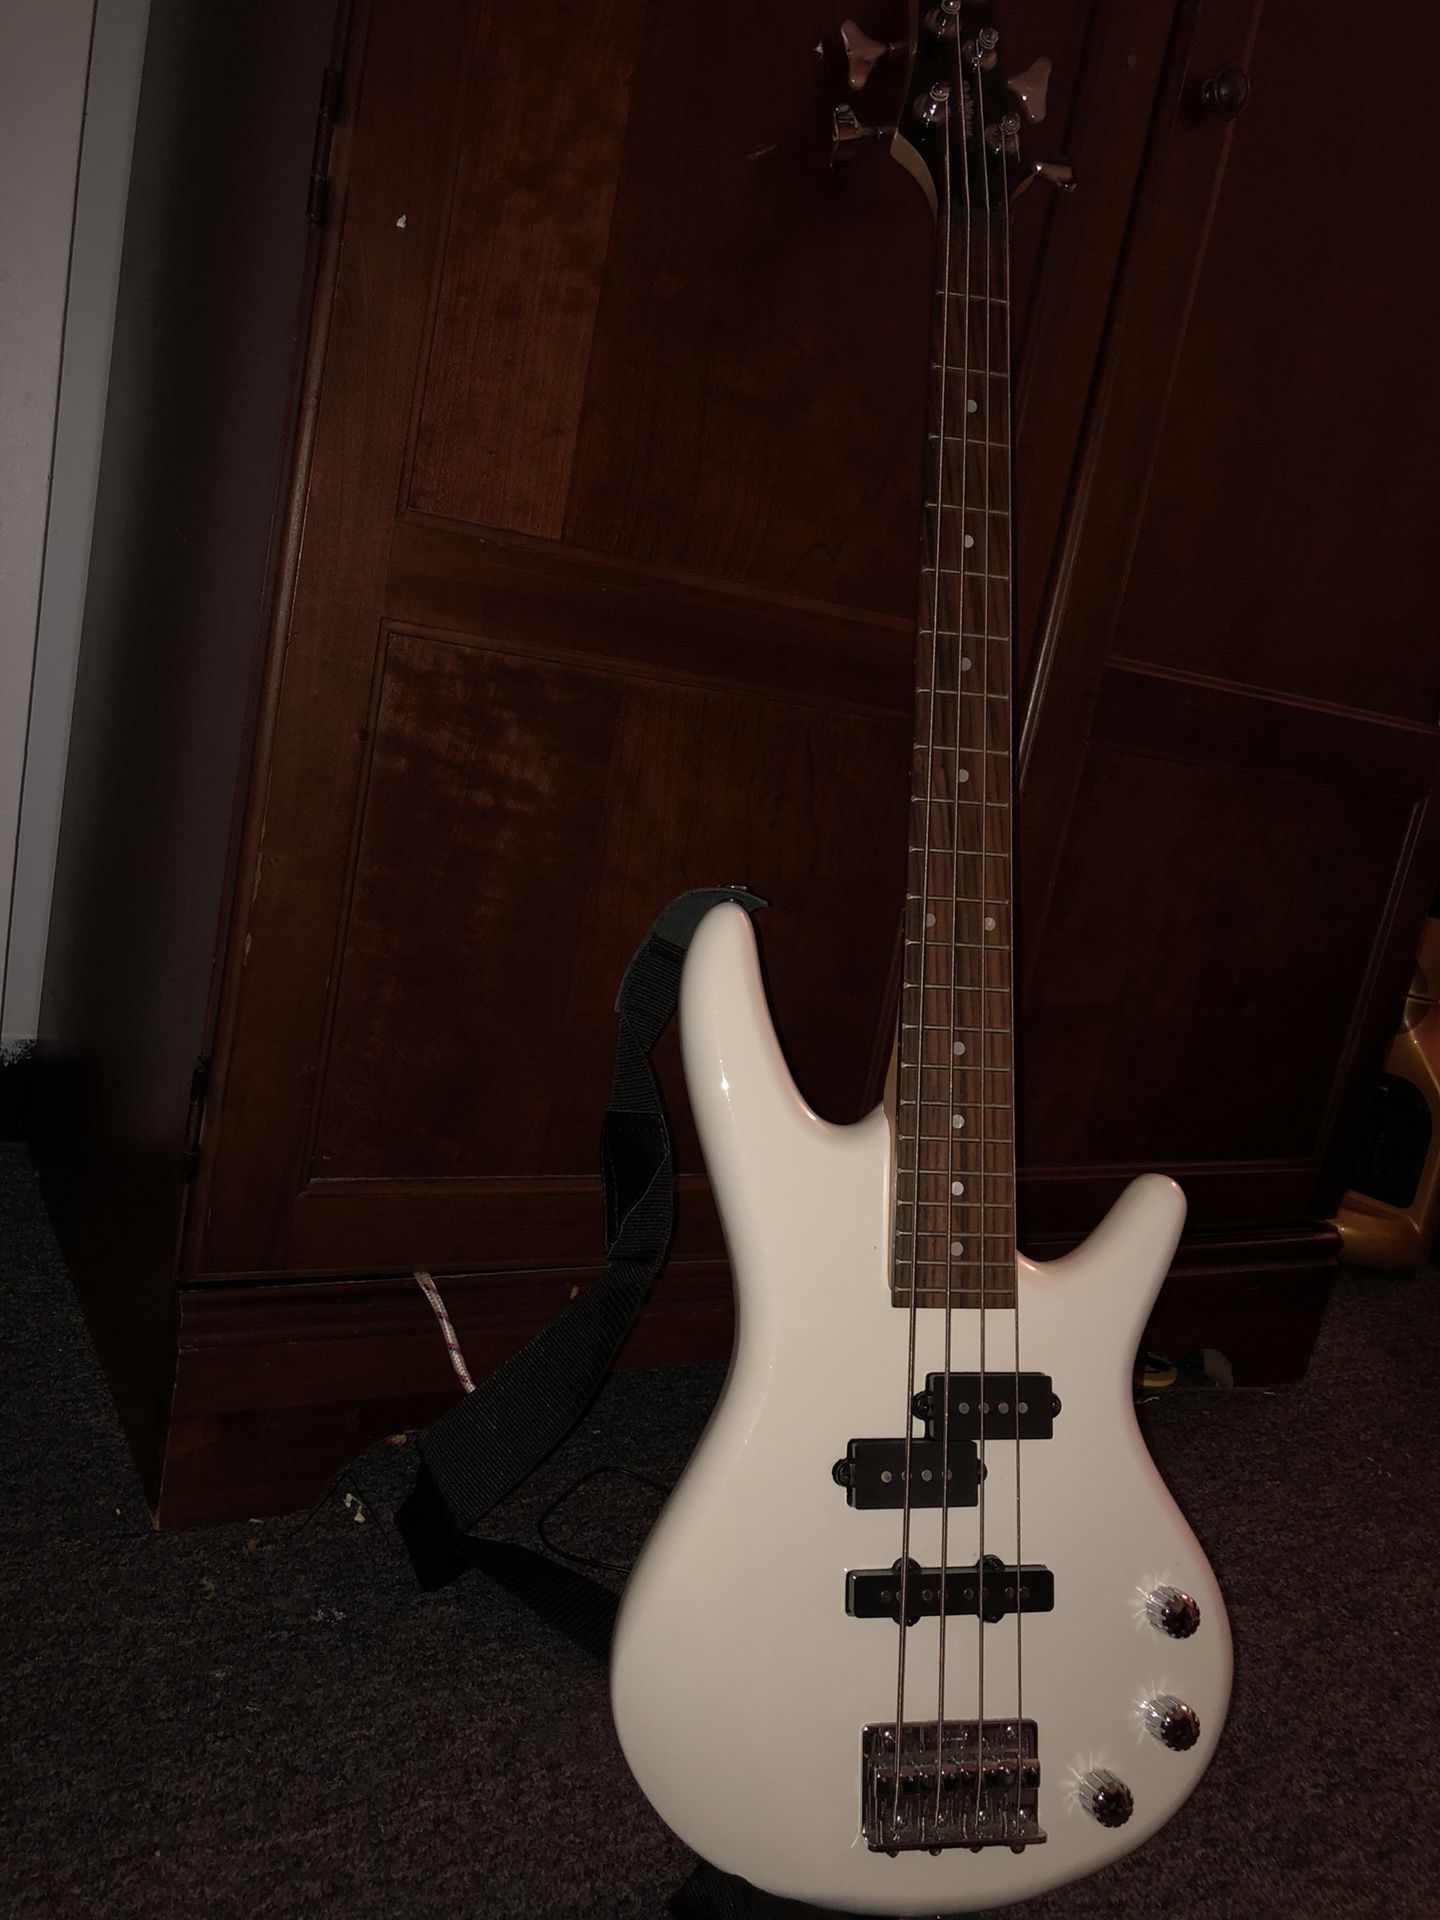 *UNTOUCHED* Ibanez Bass guitar